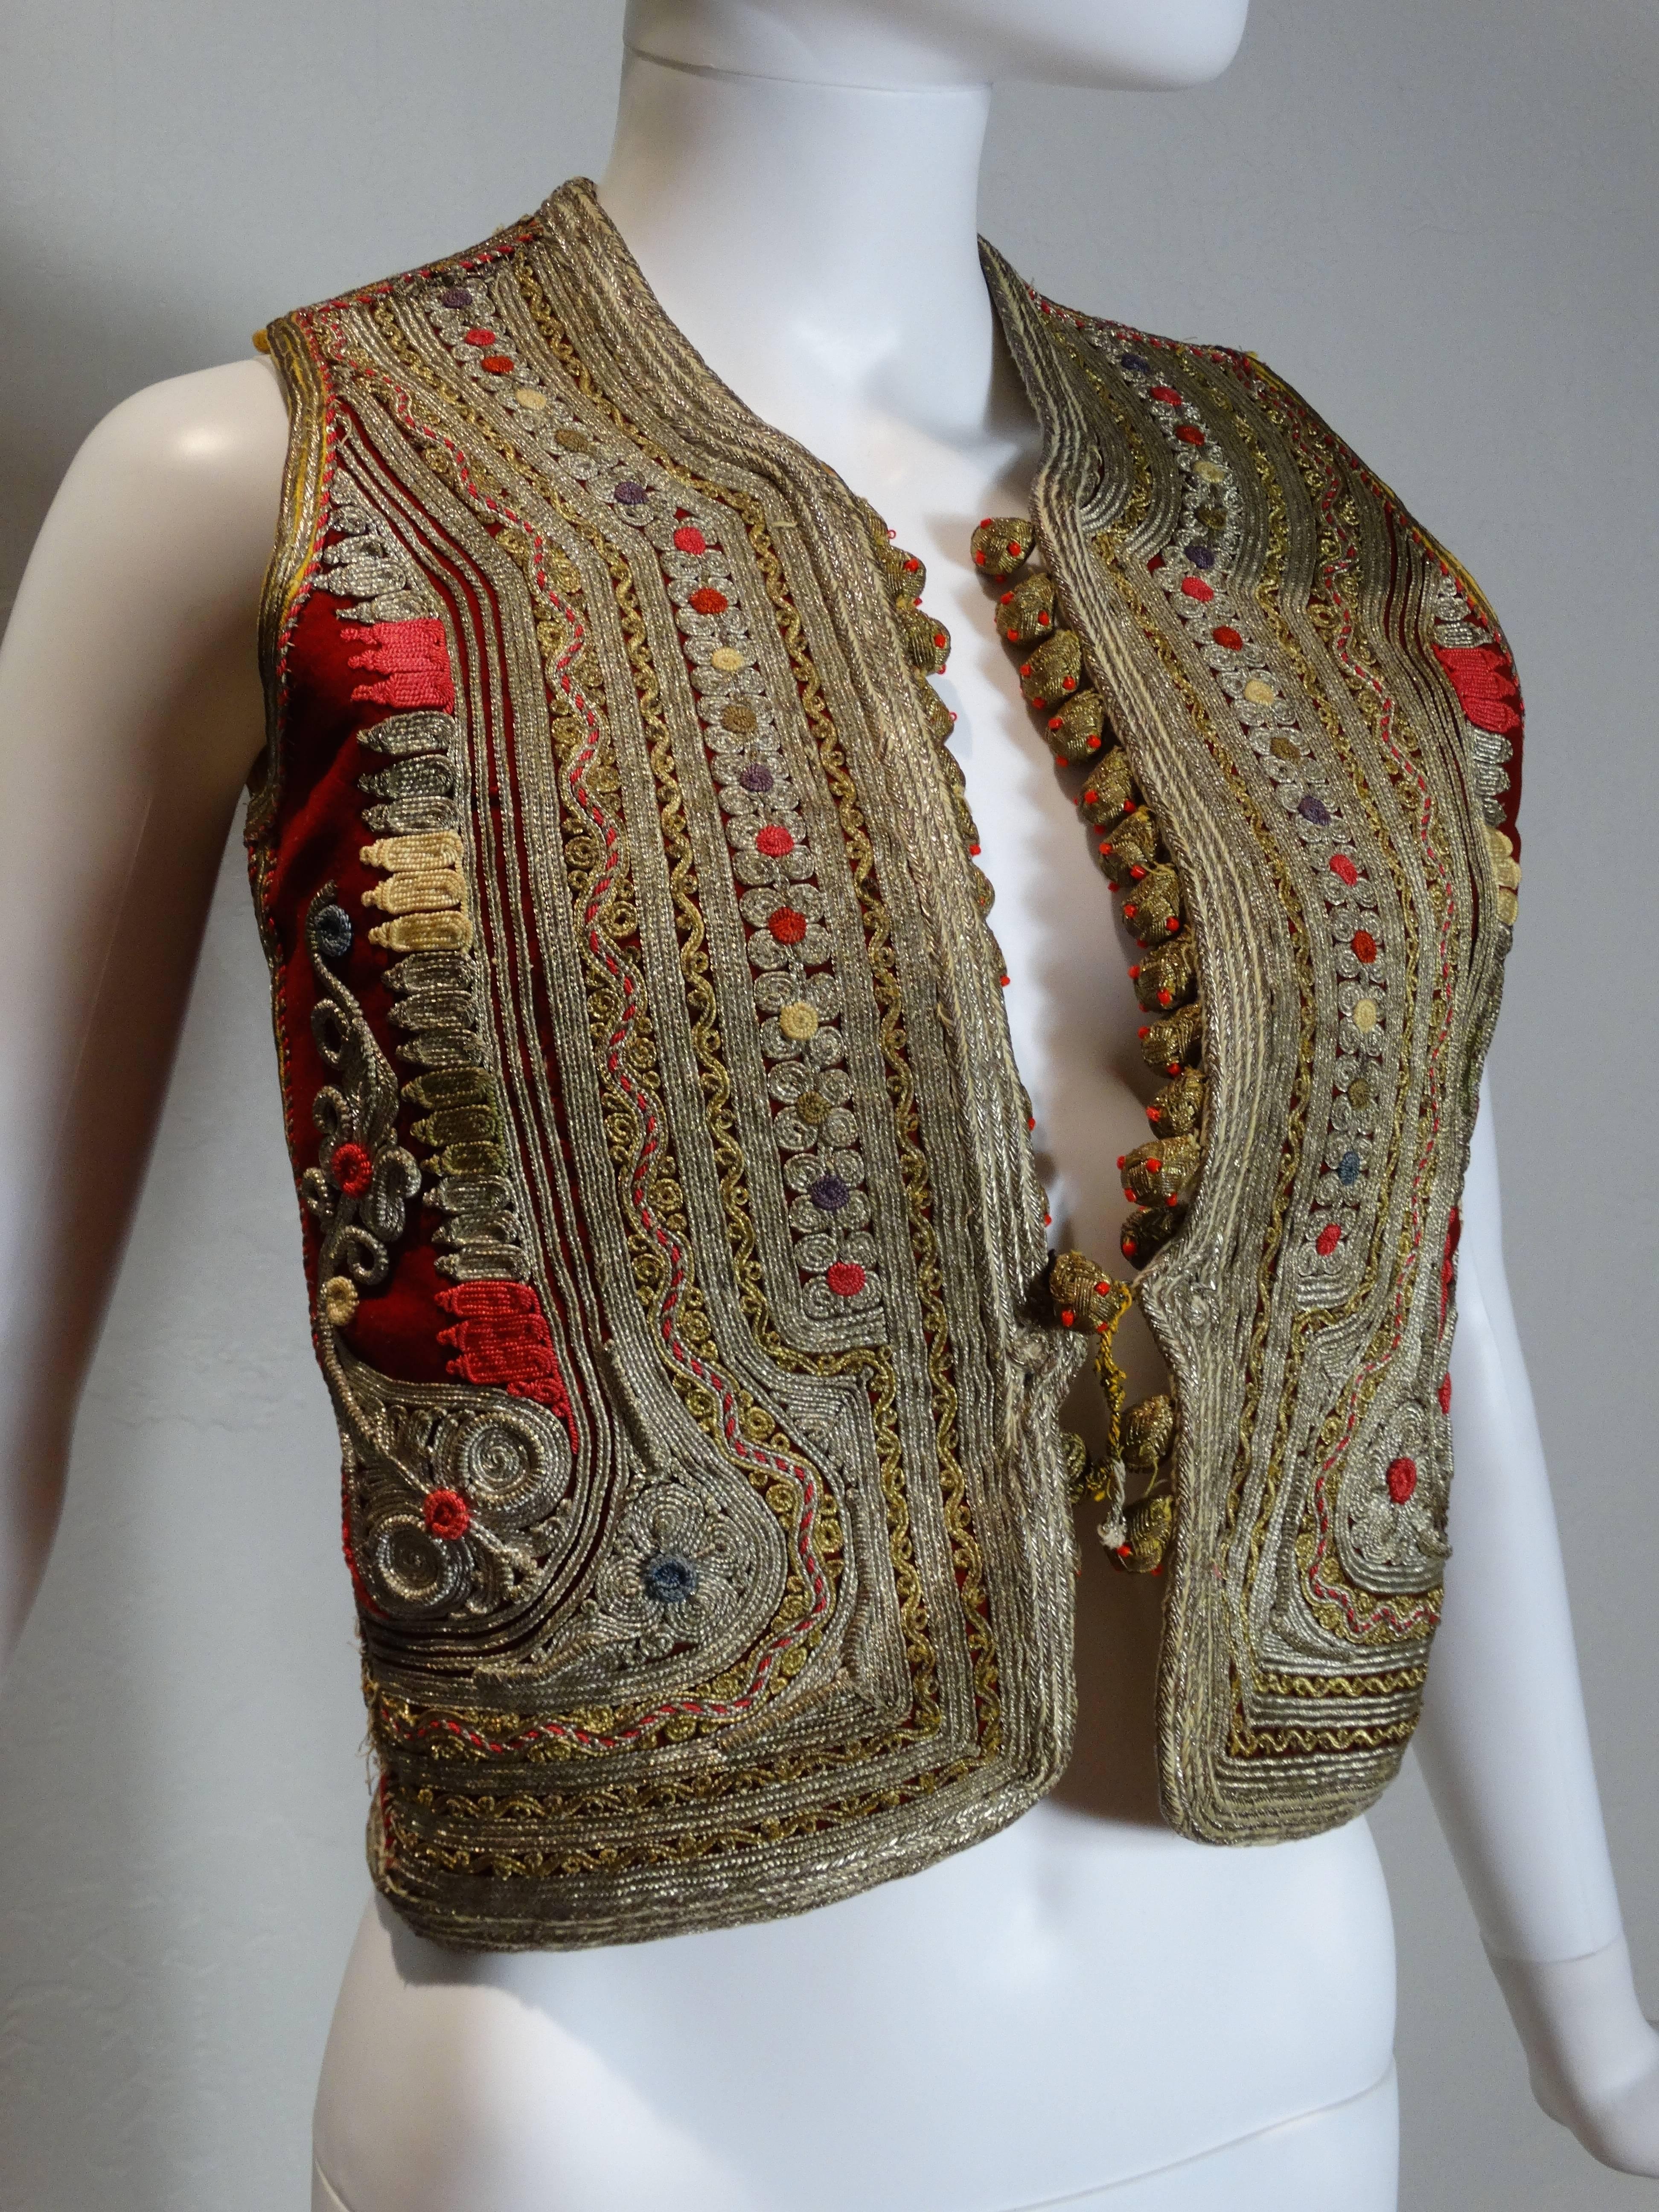 Stunning and ultra rare Authentic late 19th century Antique Ottoman Turkish Islamic art Vest in blood red wool felt decorated with elaborate couched gold thread and tassels, trimmed with gold thread buttons with coral beads. Floral print richly